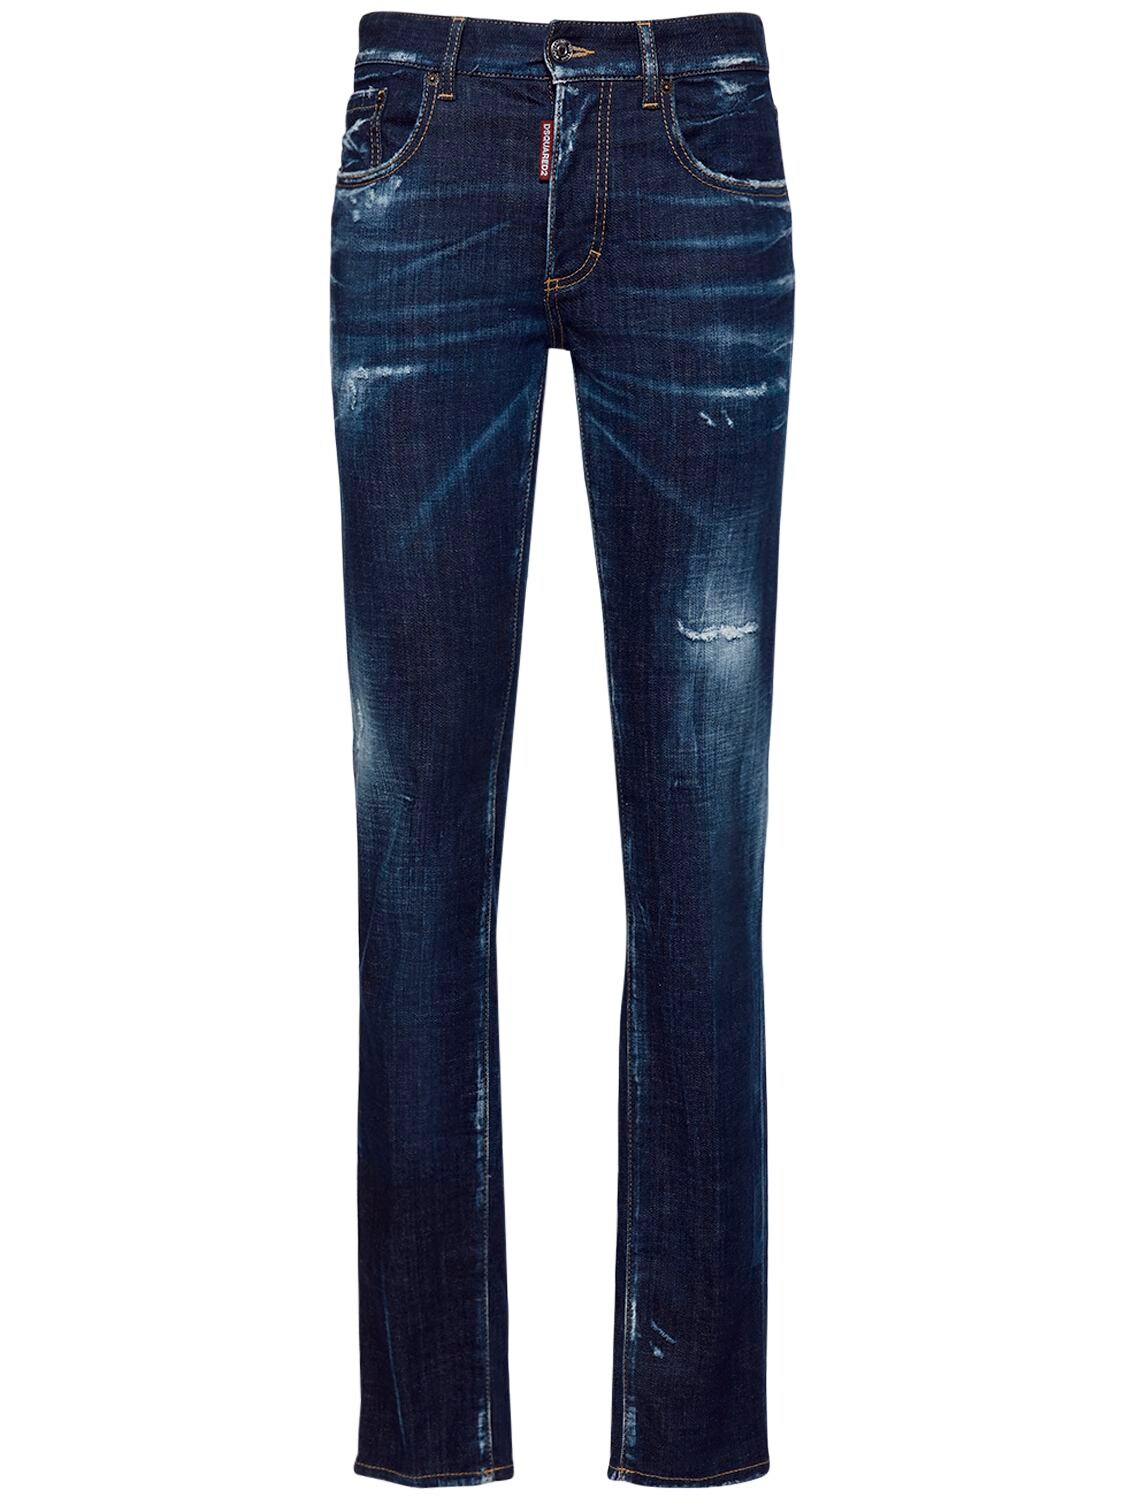 Image of 24/7 Stretch Denim Loose Fit Jeans